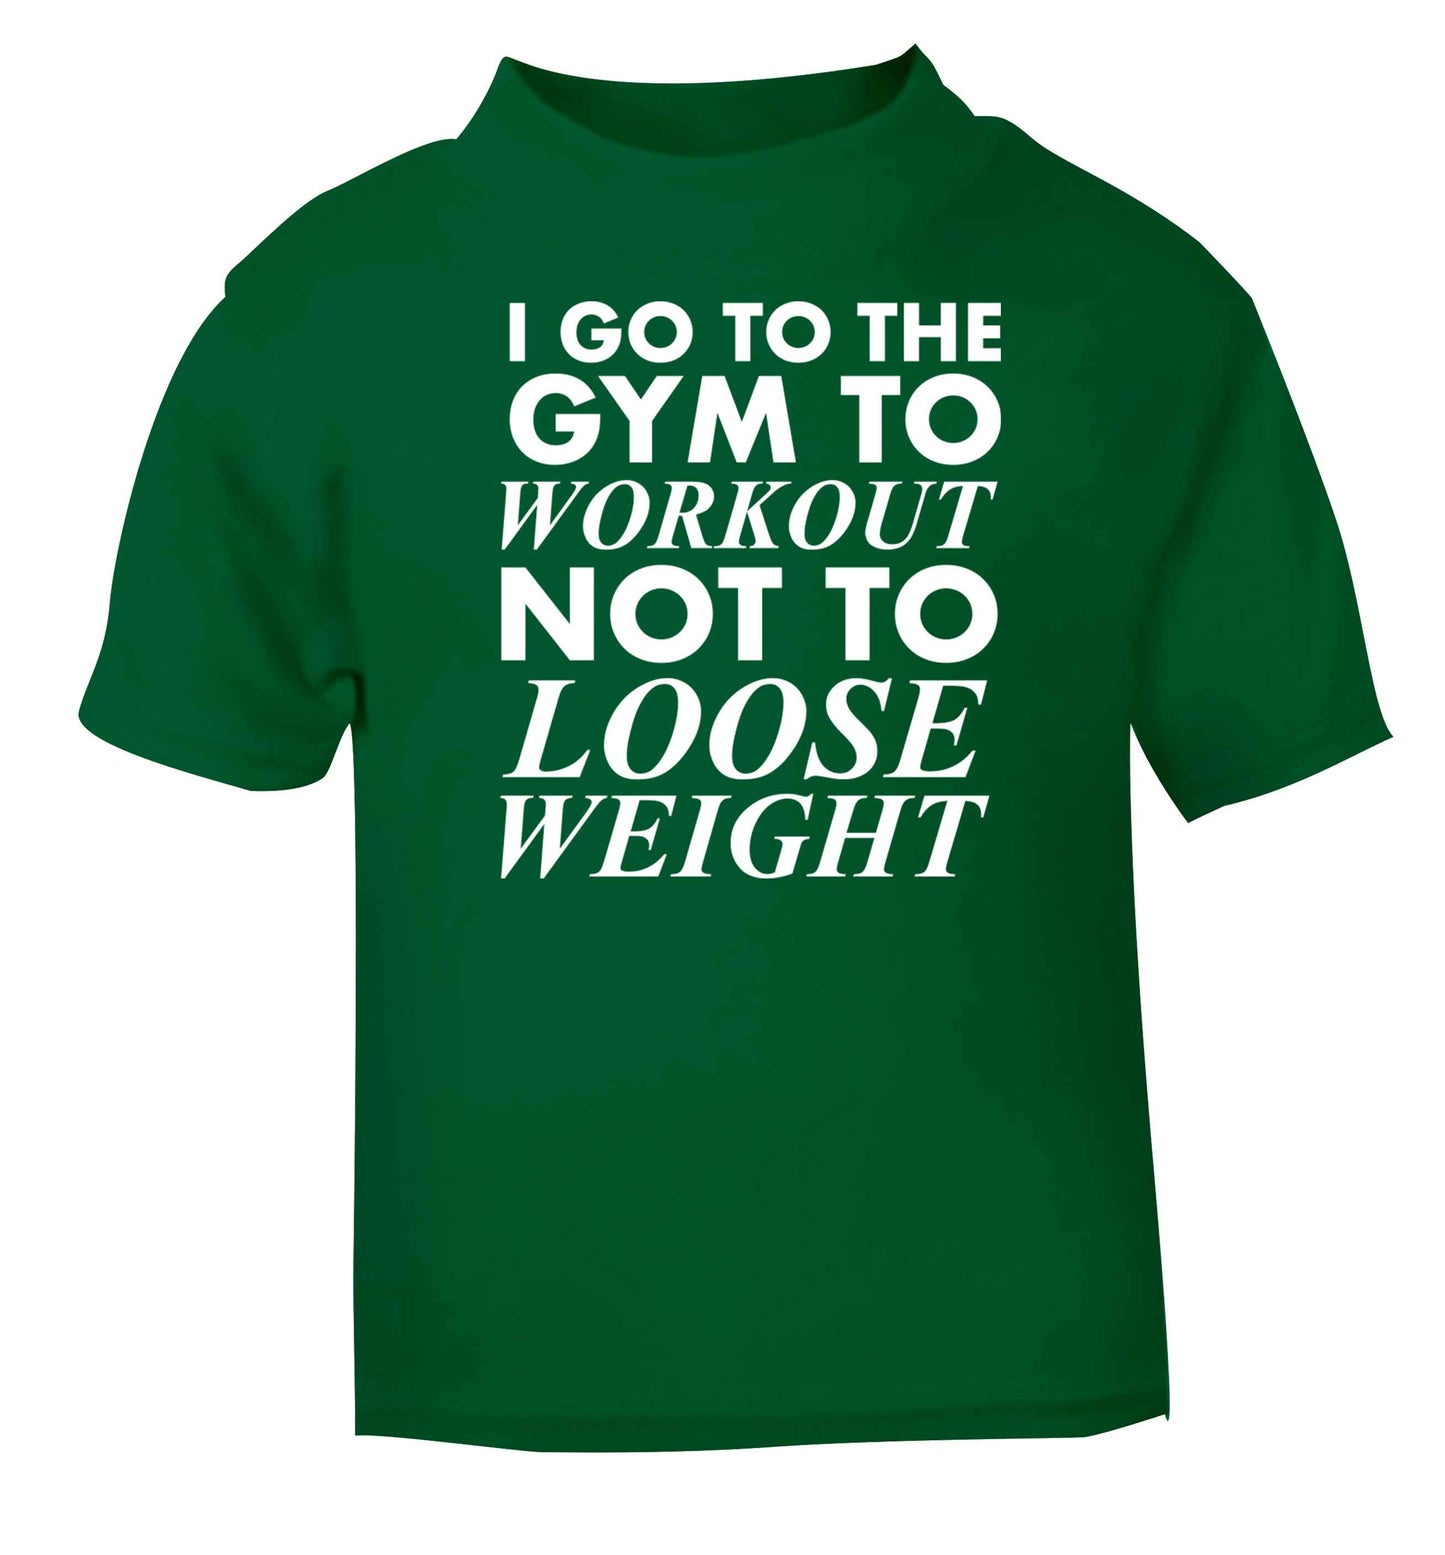 I go to the gym to workout not to loose weight green baby toddler Tshirt 2 Years